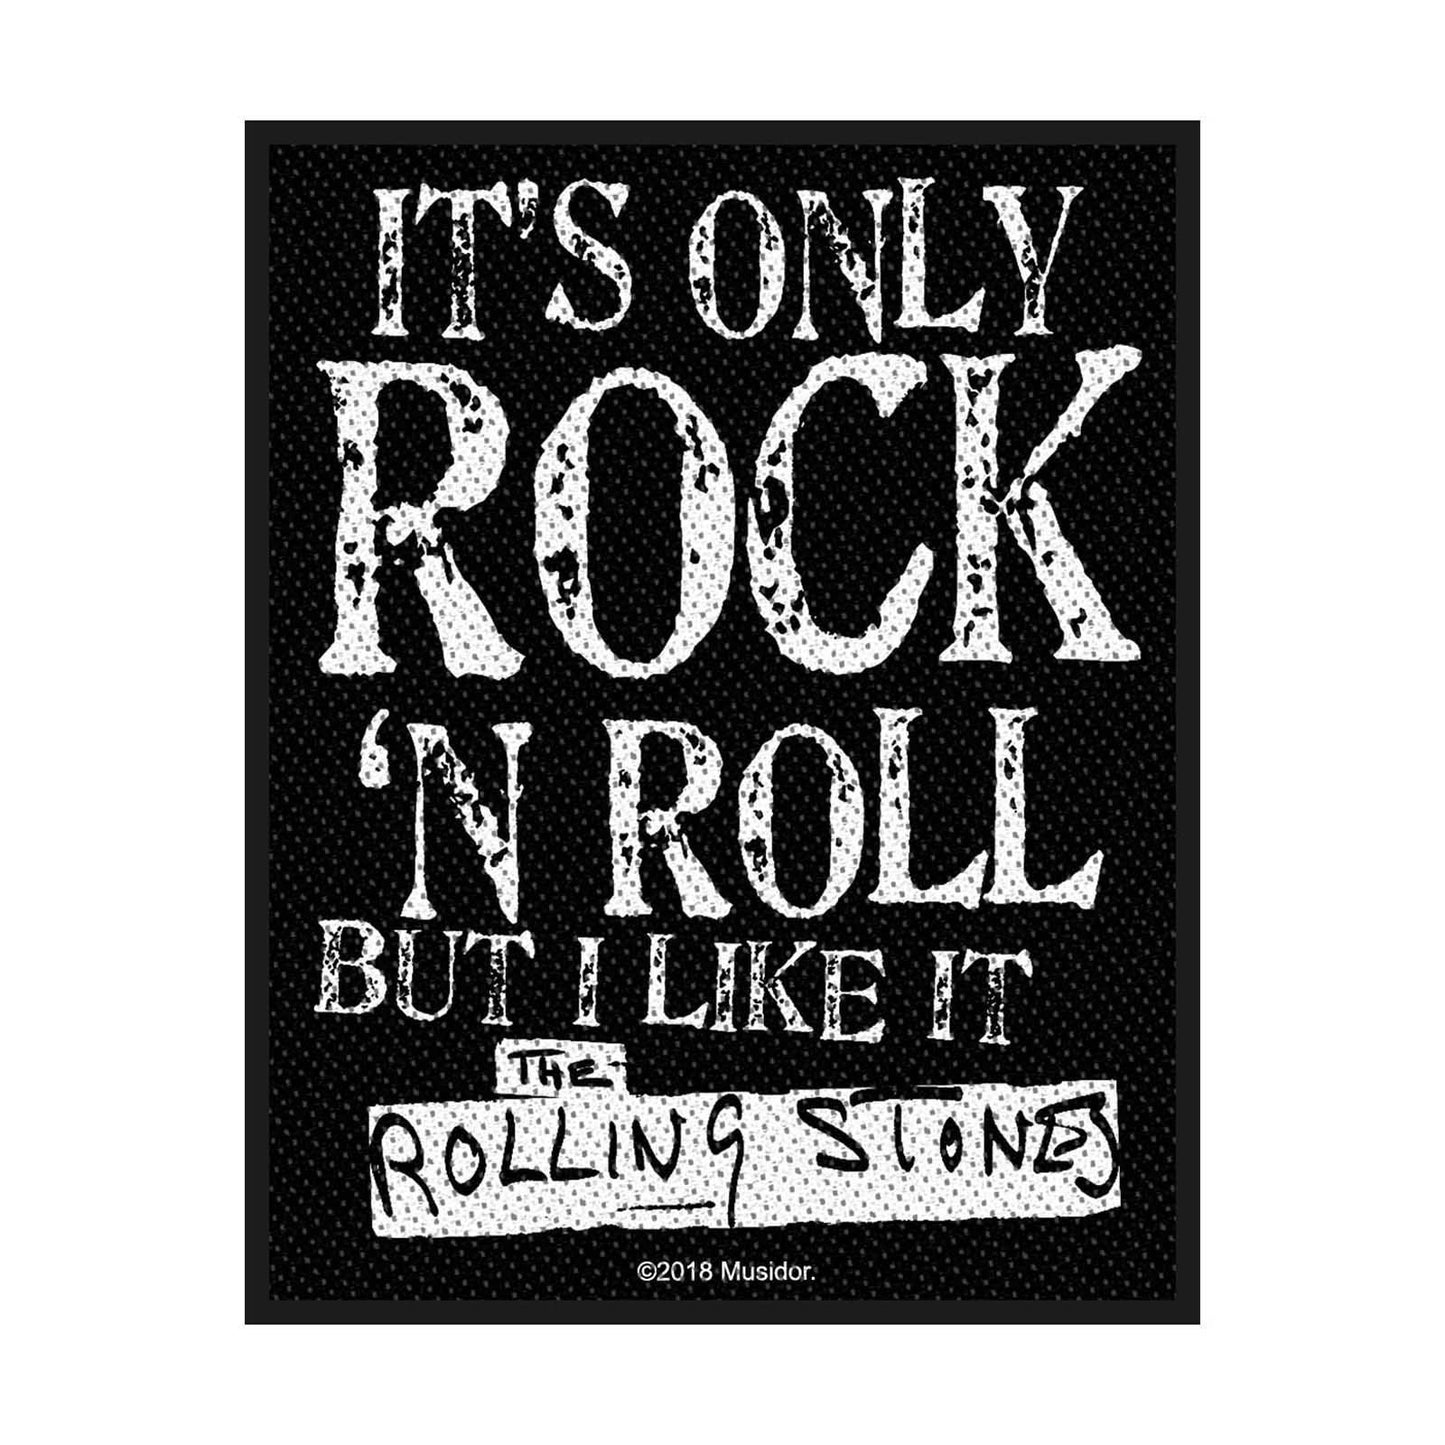 THE ROLLING STONES STANDARD PATCH: IT'S ONLY ROCK N' ROLL